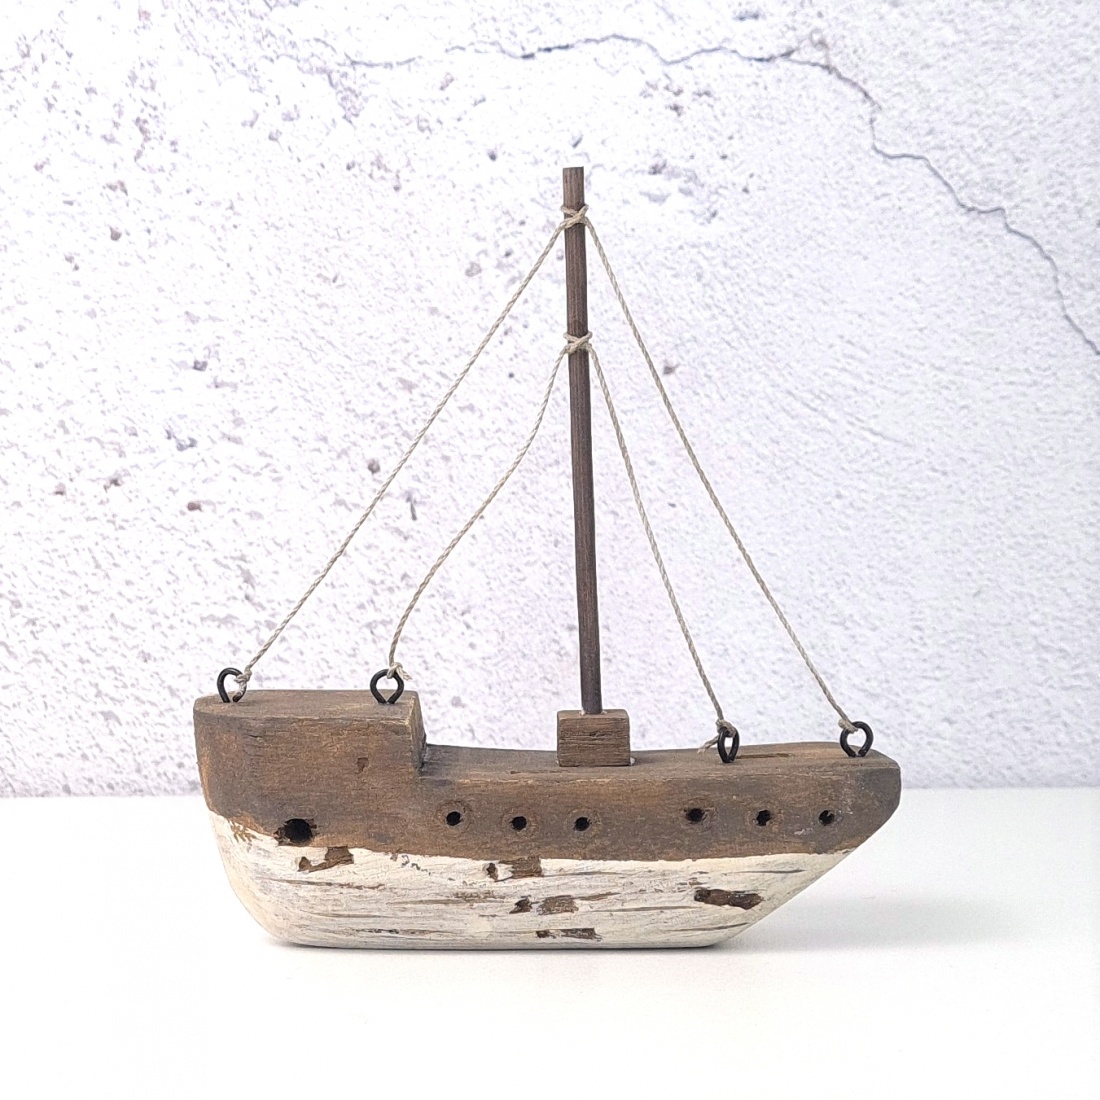 Chunky Wooden Boat with Mast